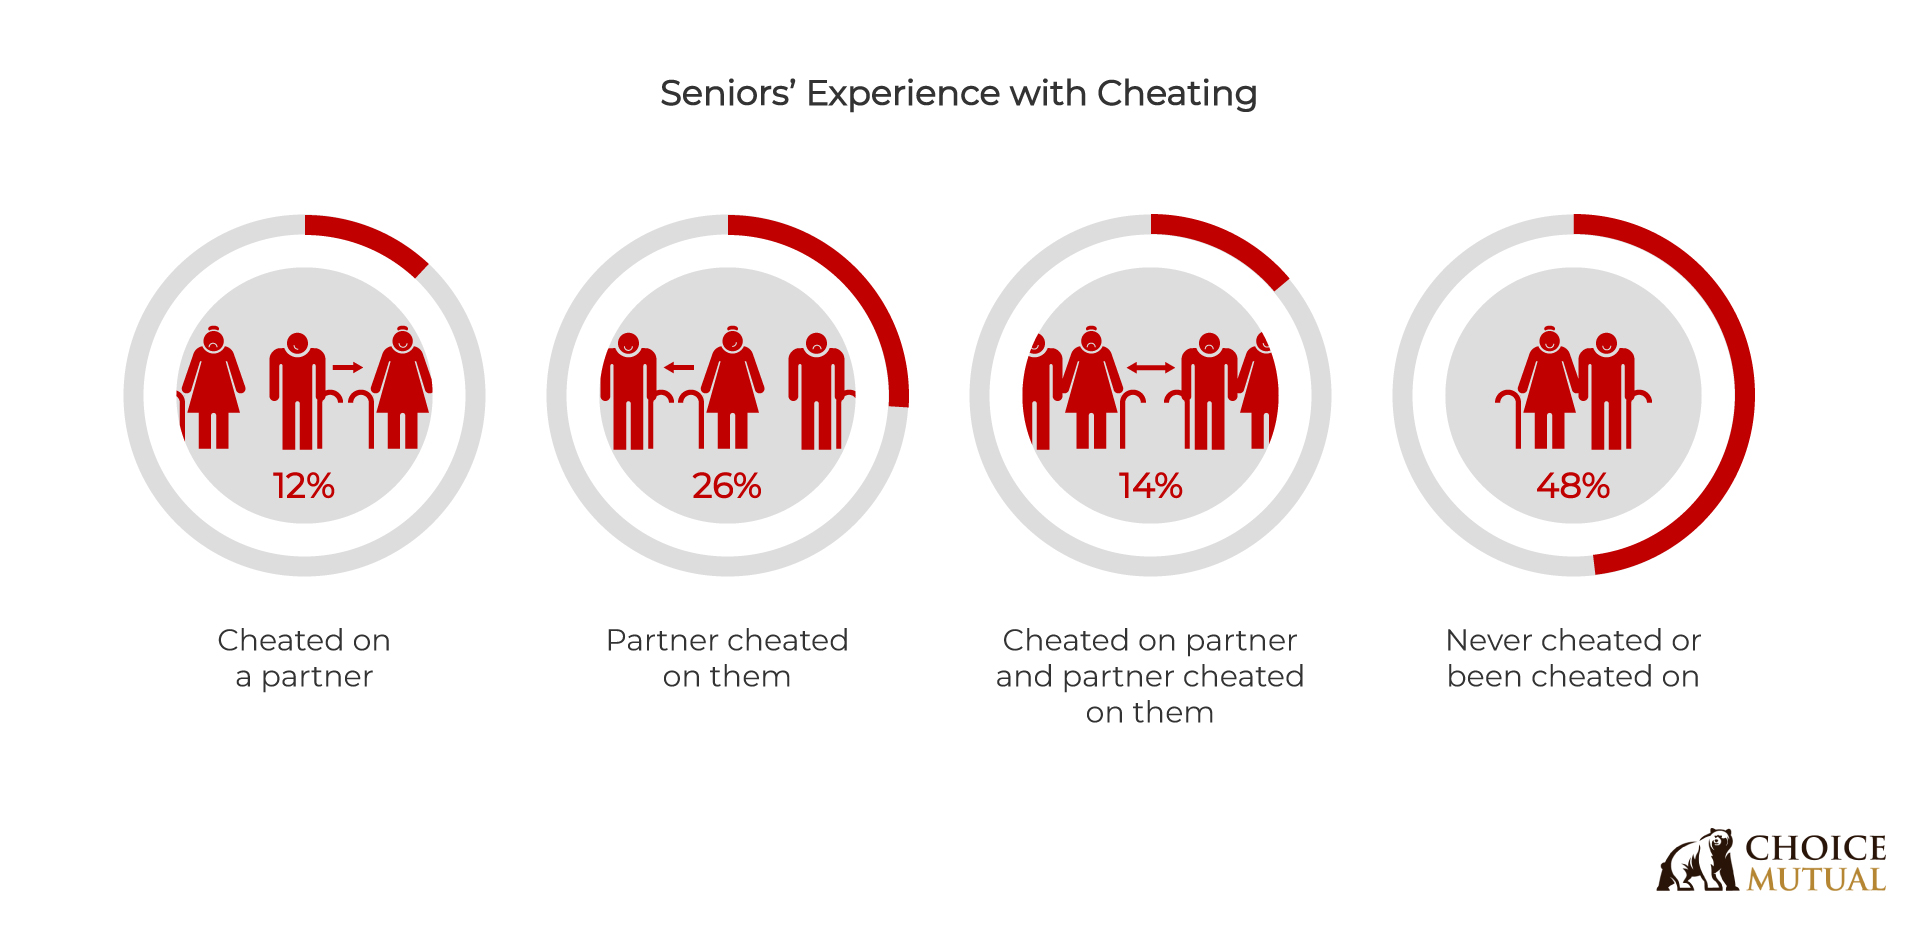 Charts showing how frequently and how seniors experience cheating